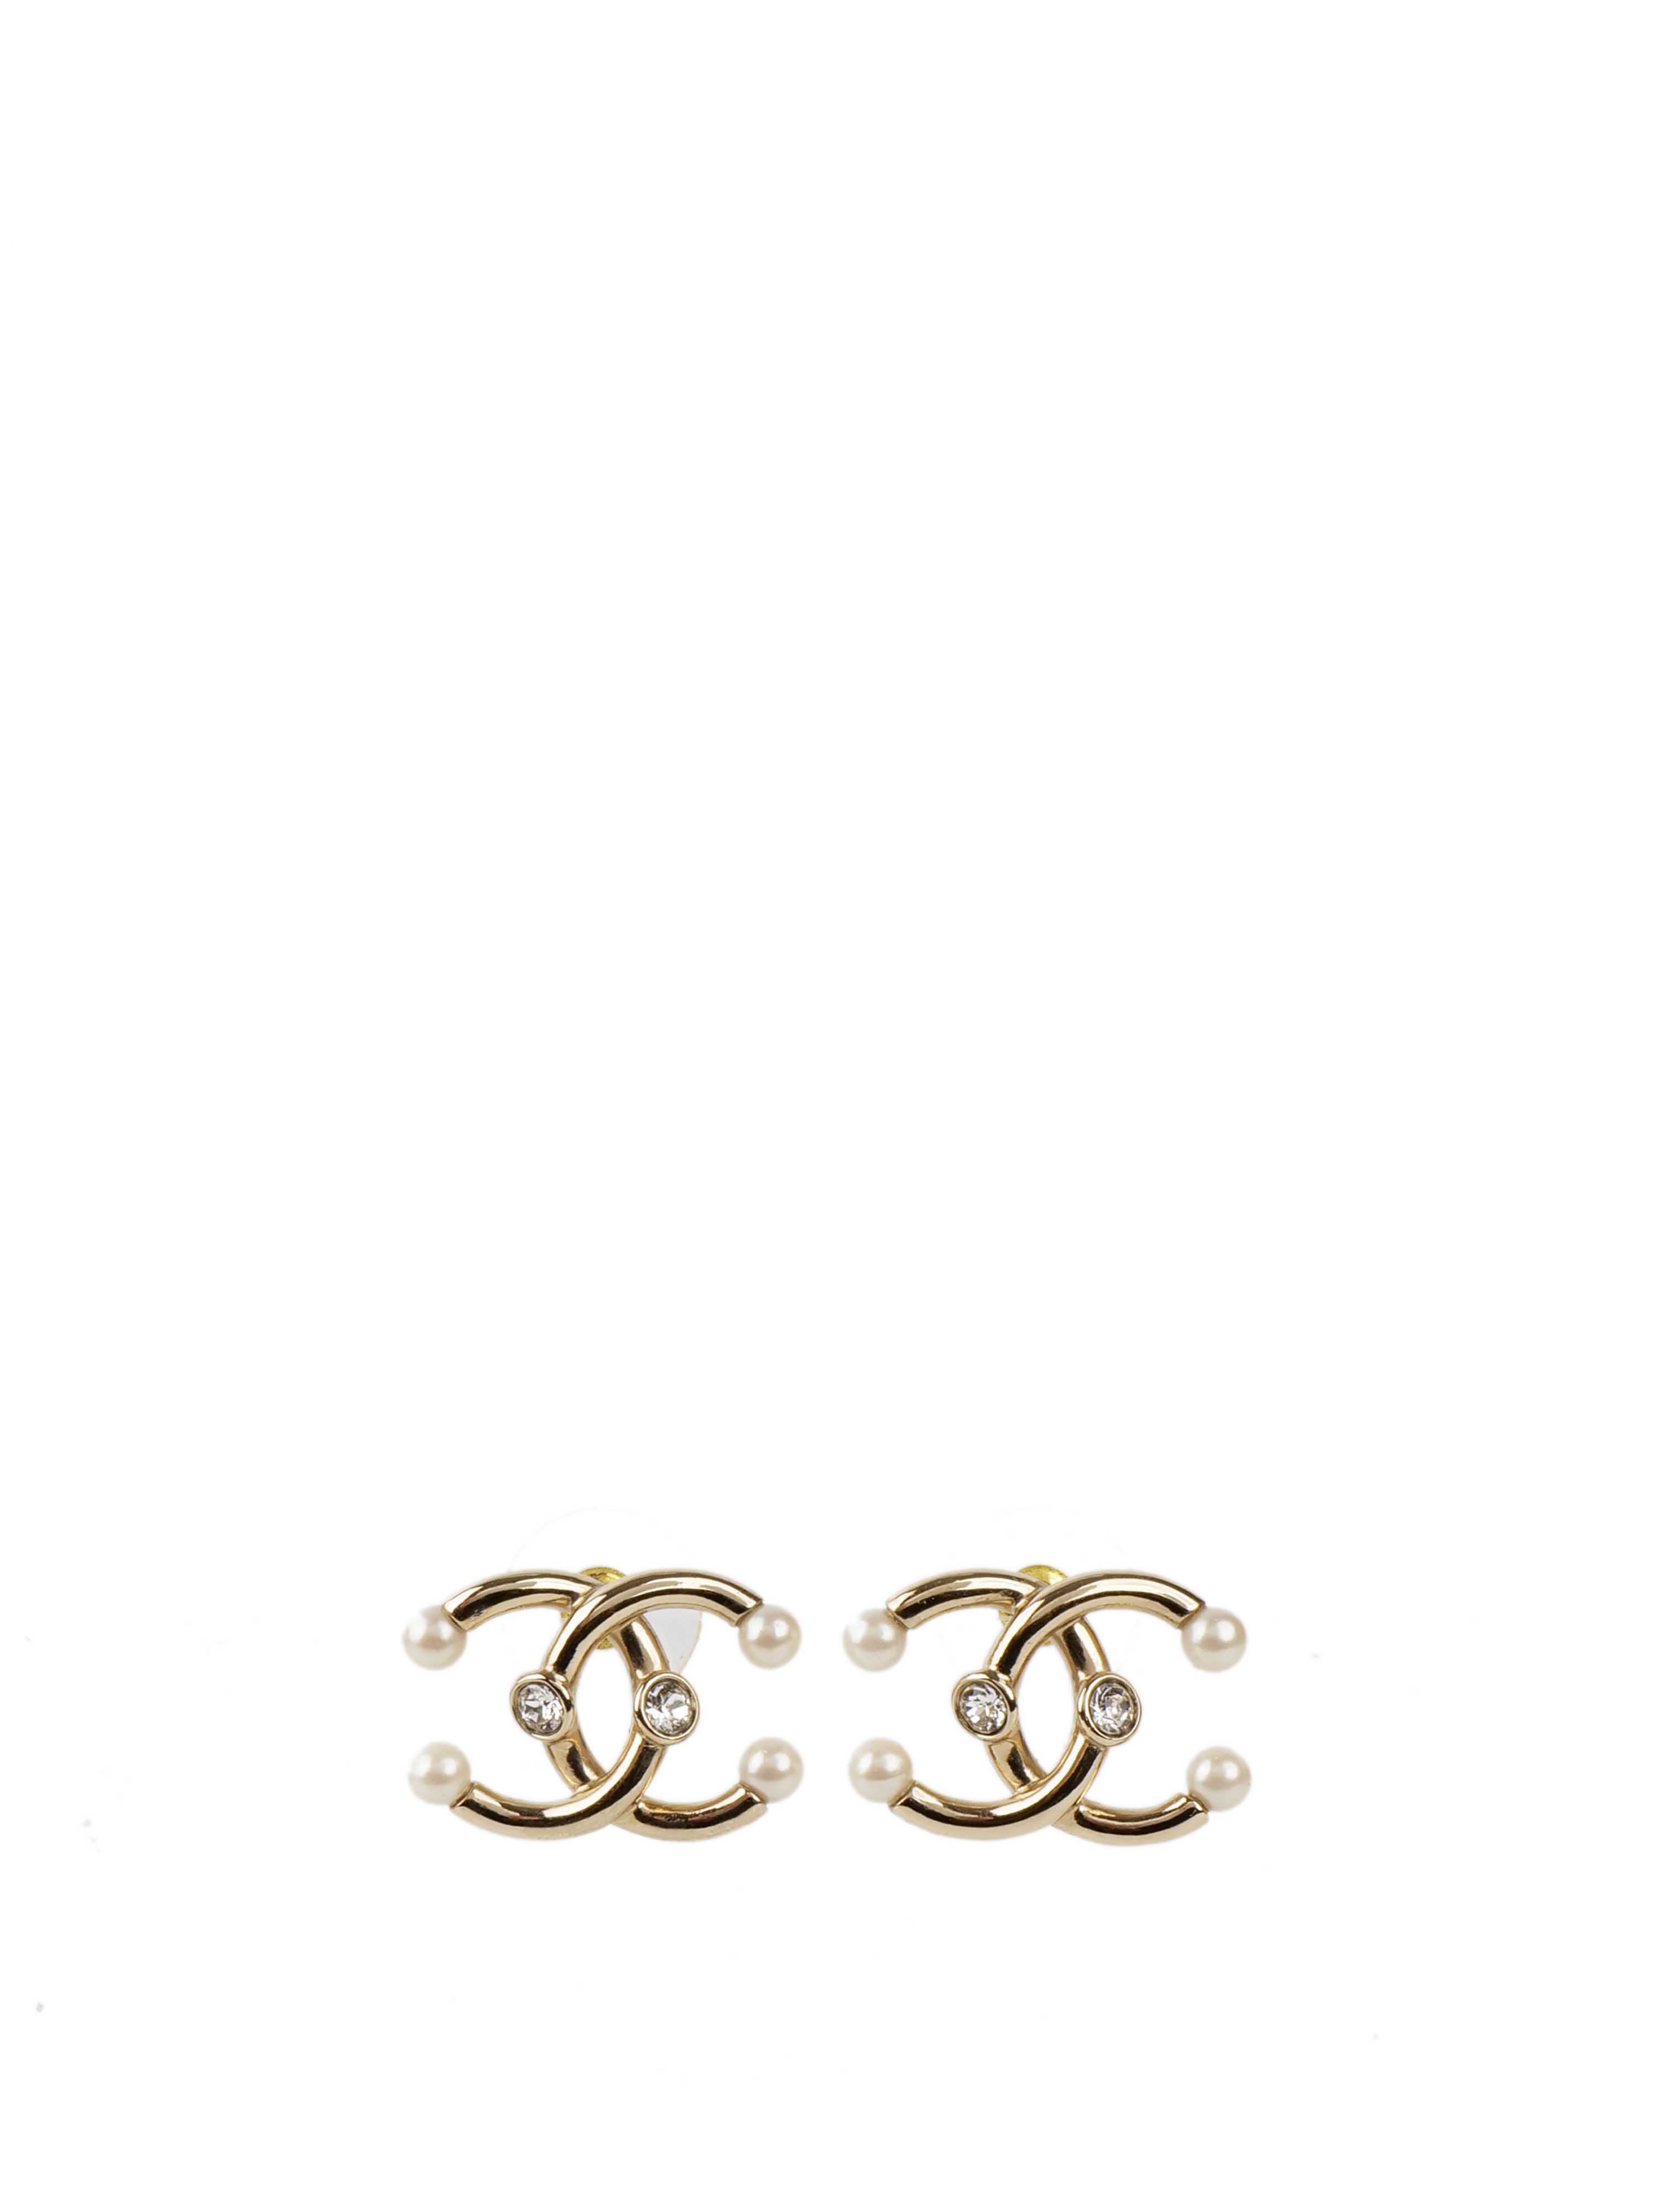 Chanel CC Earrings with Pearls.